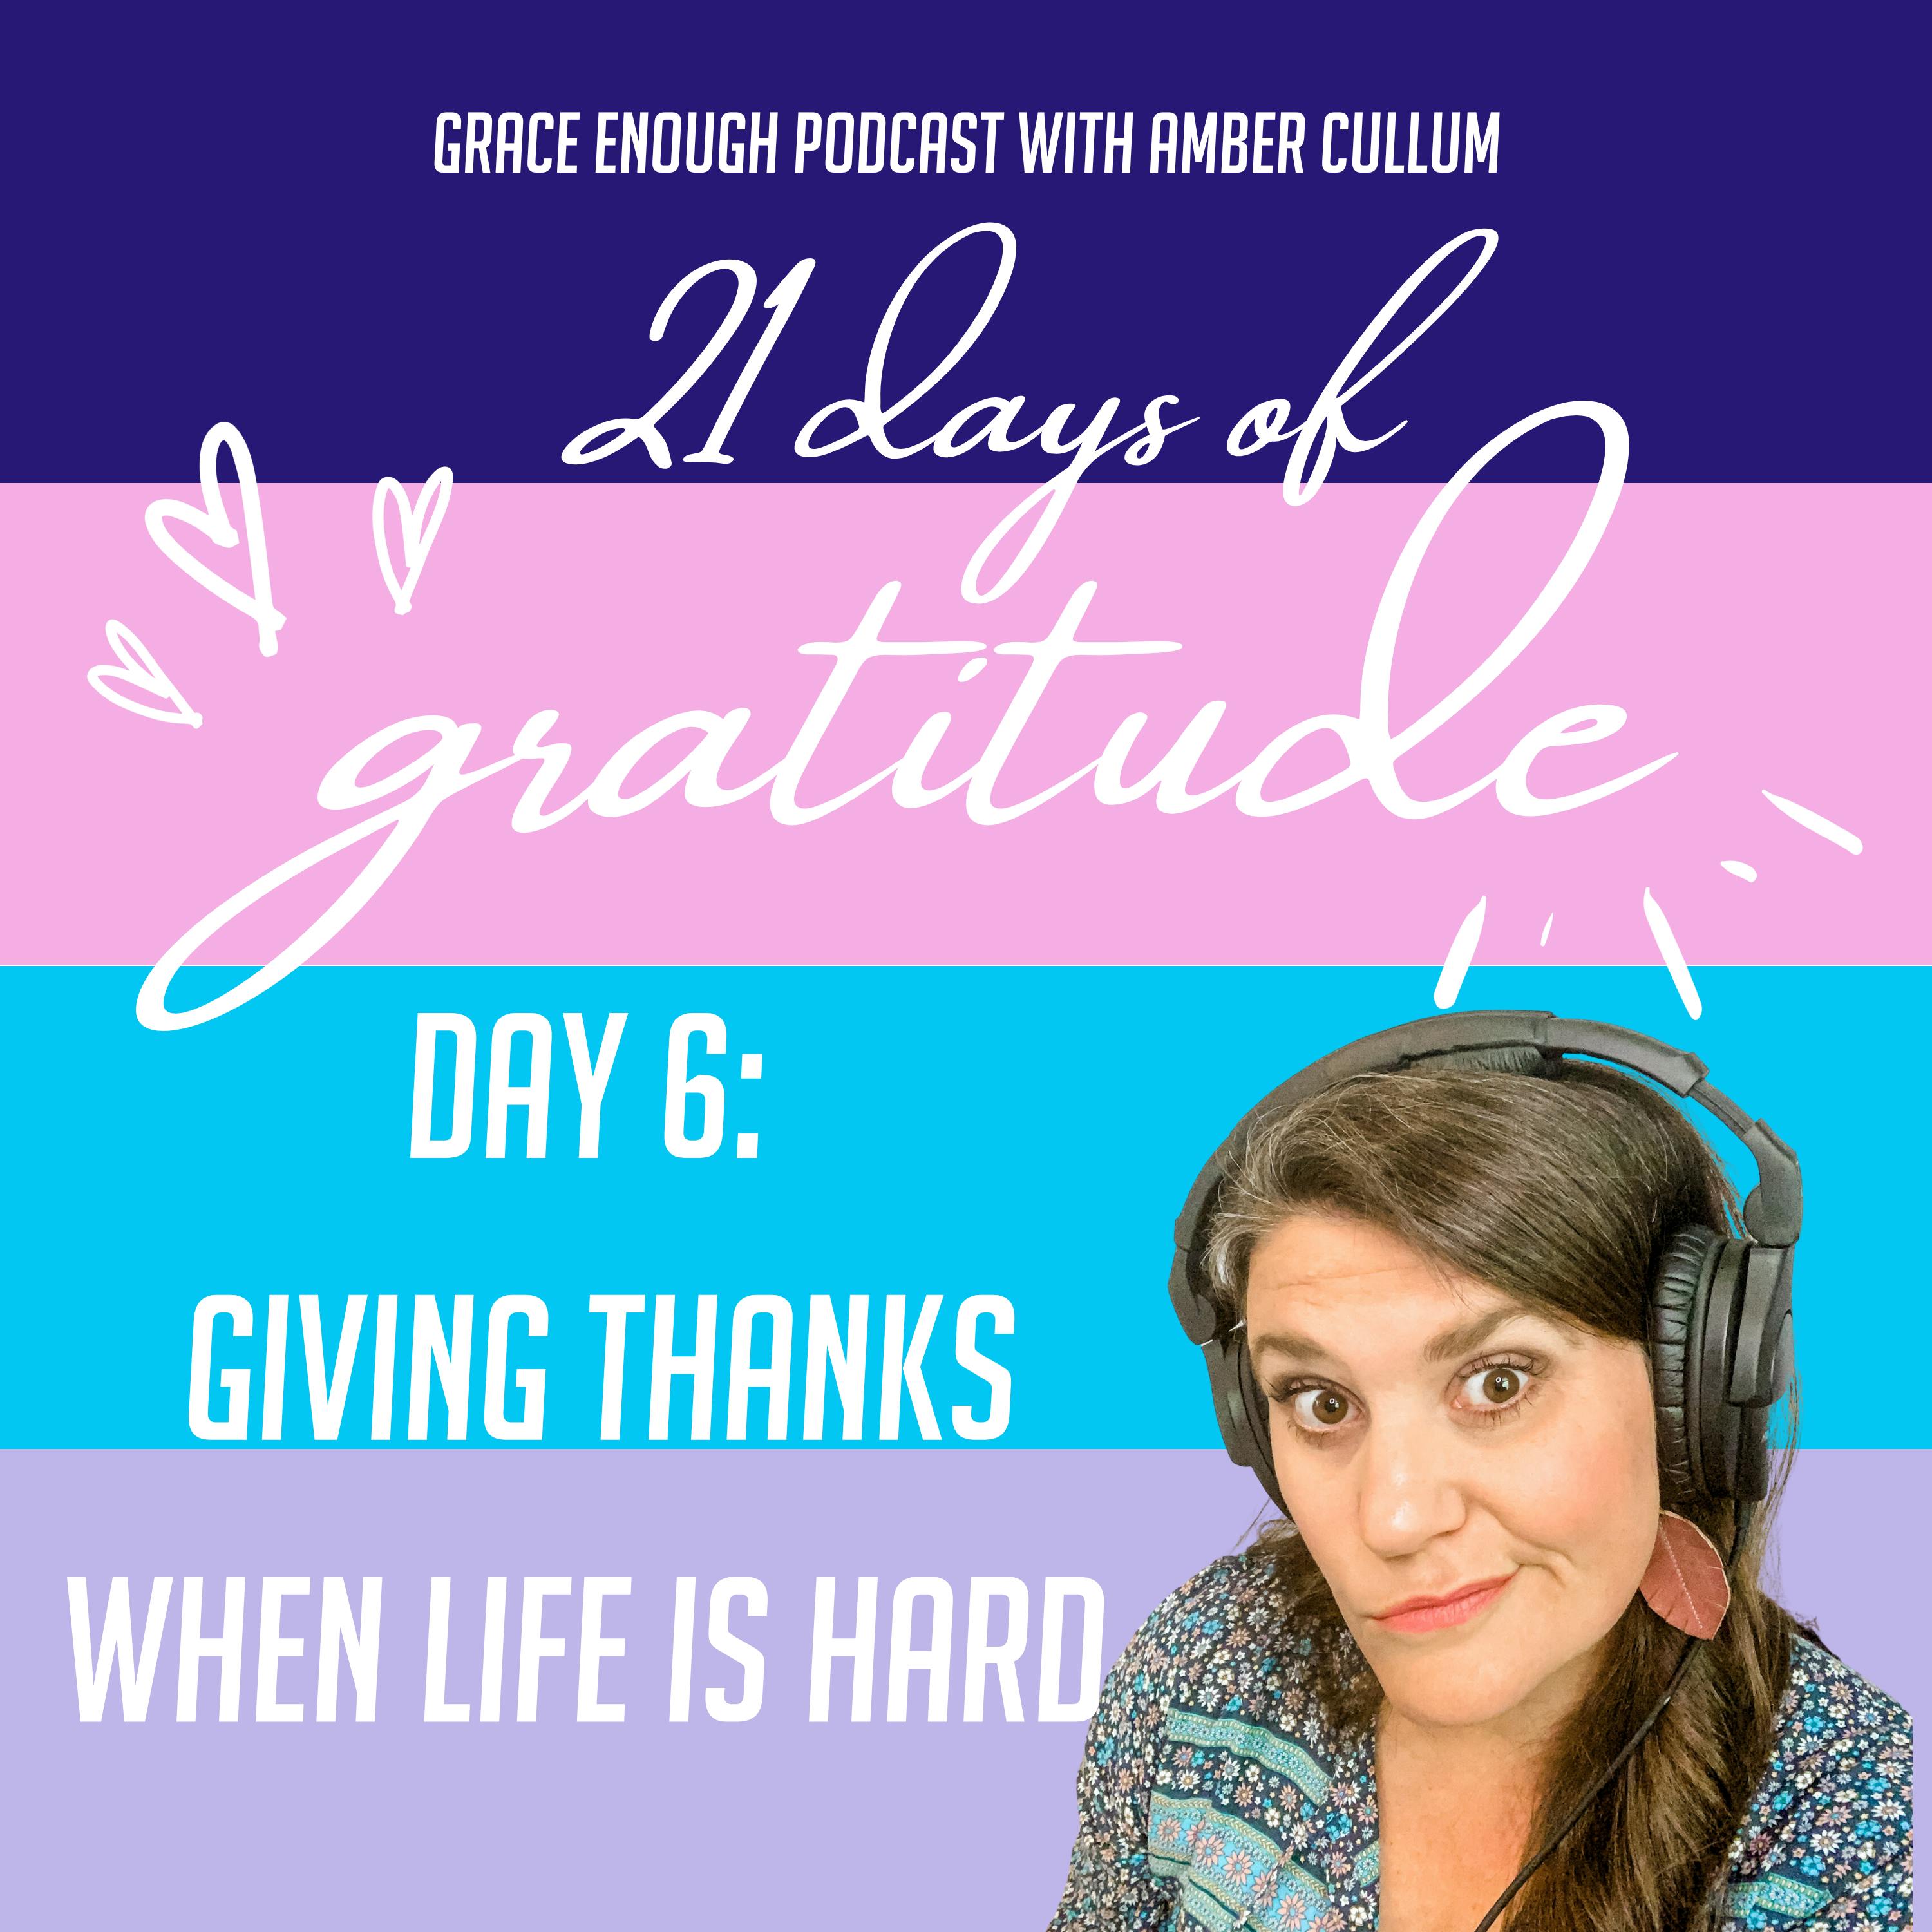 6/21 Days of Gratitude: Giving Thanks When Life is Hard